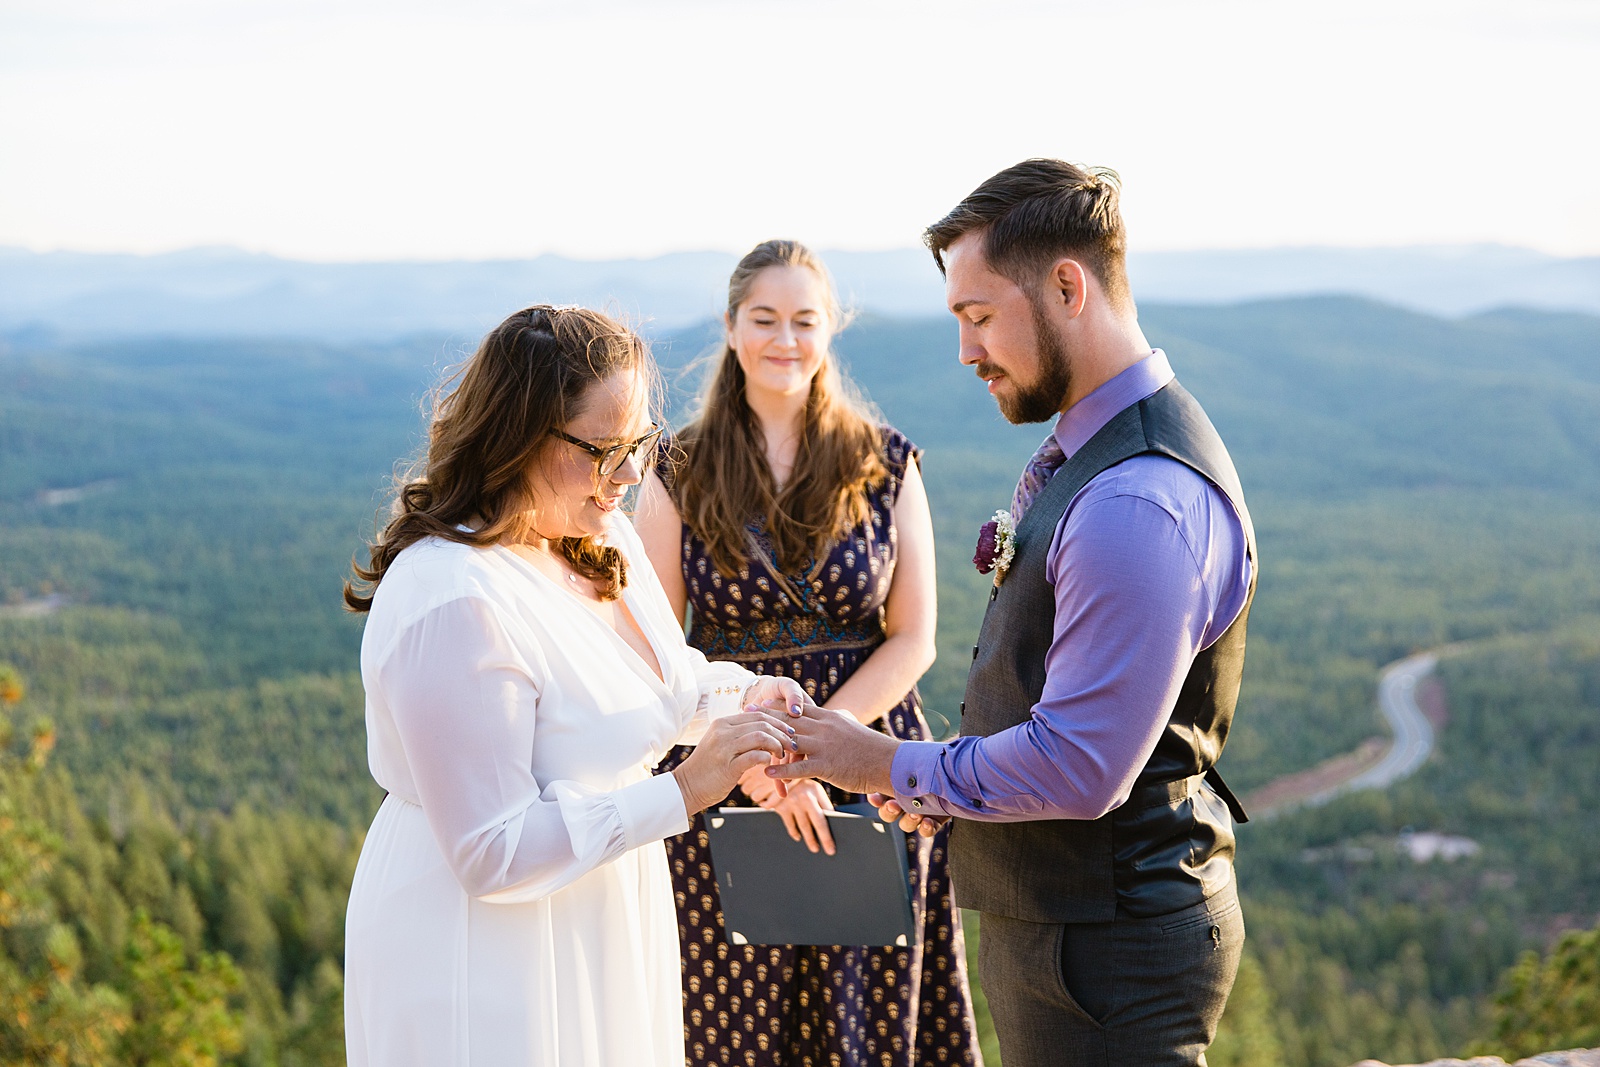 Bride and Groom exchange rings during their wedding ceremony at Mogollon Rim by Arizona elopement photographer PMA Photography.